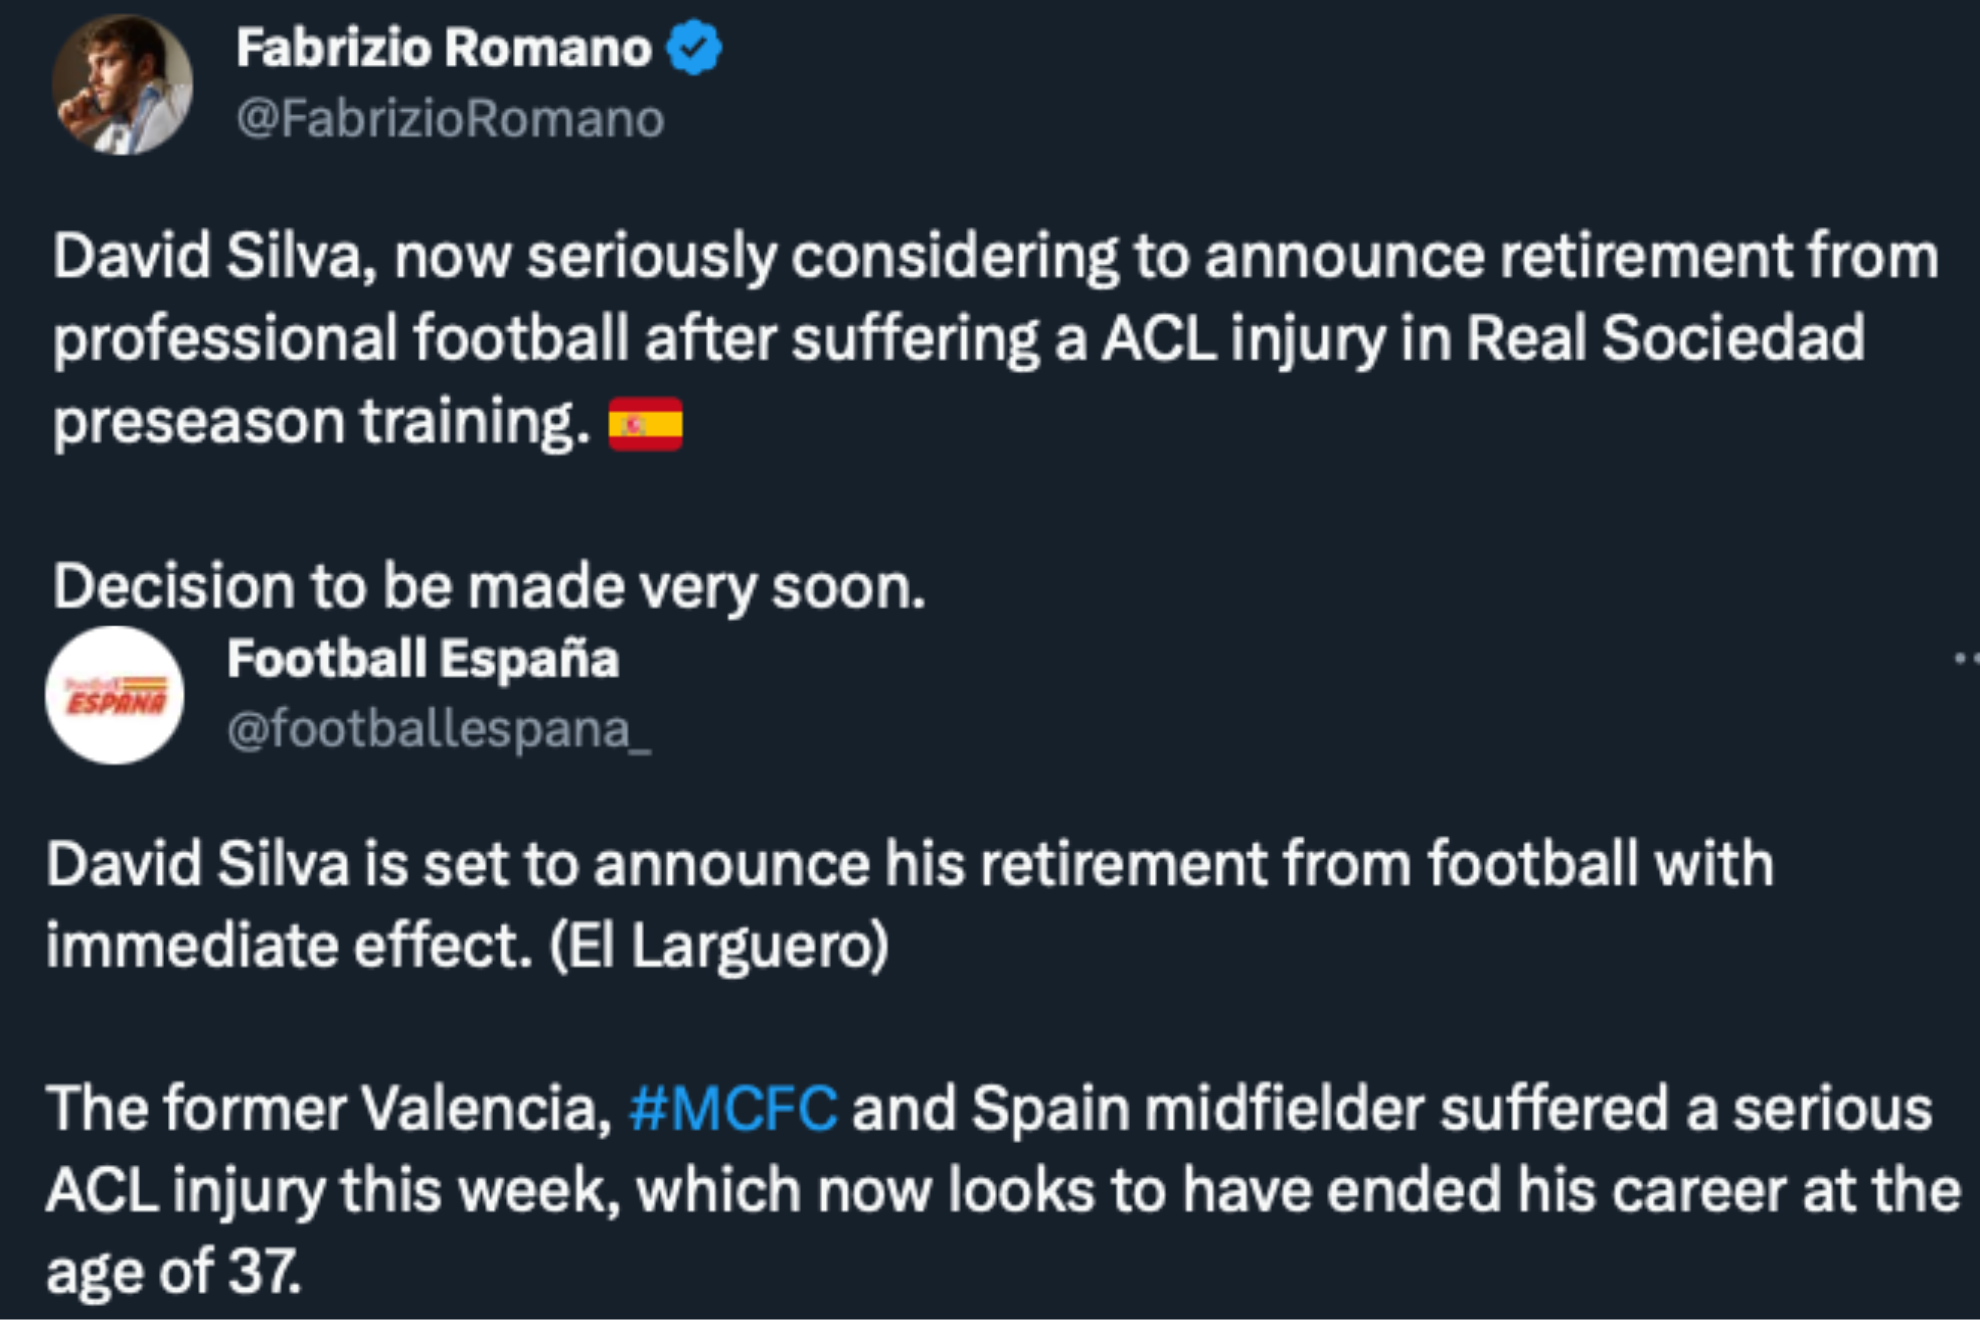 Reports quickly surfaced of David Silva's possible retirement.